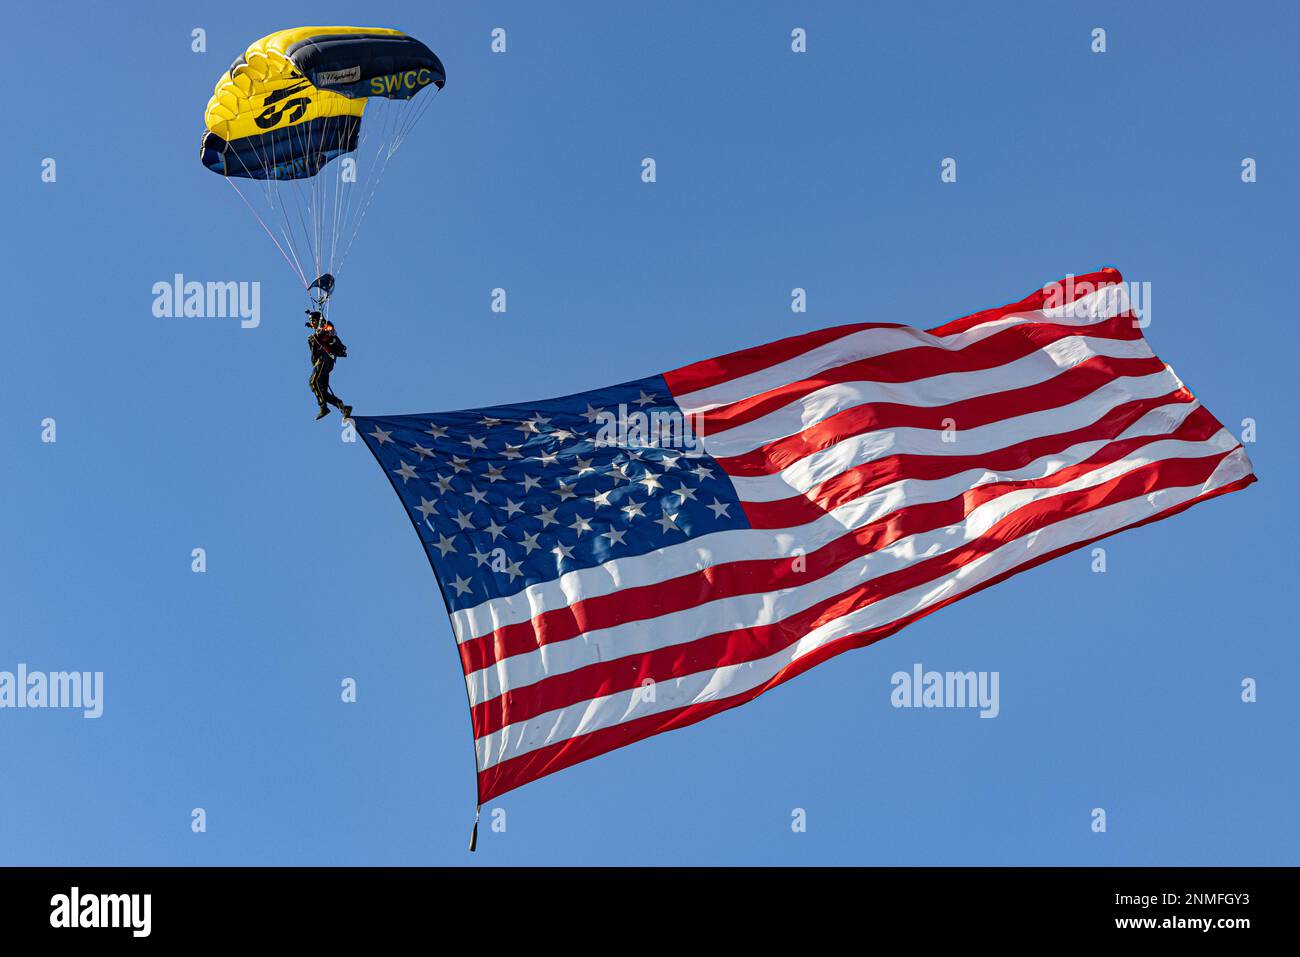 A member of the U.S. Navy Leap Frogs parachute team participates in a jump during the season opening ceremony for the San Diego Legion at Snapdragon Stadium, Feb. 18, 2023. The San Diego Legion is part of Major League Rugby, a professional sports league starting its sixth season. (U.S. Marine Corps photo by Lance Cpl. Alex Devereux) Stock Photo